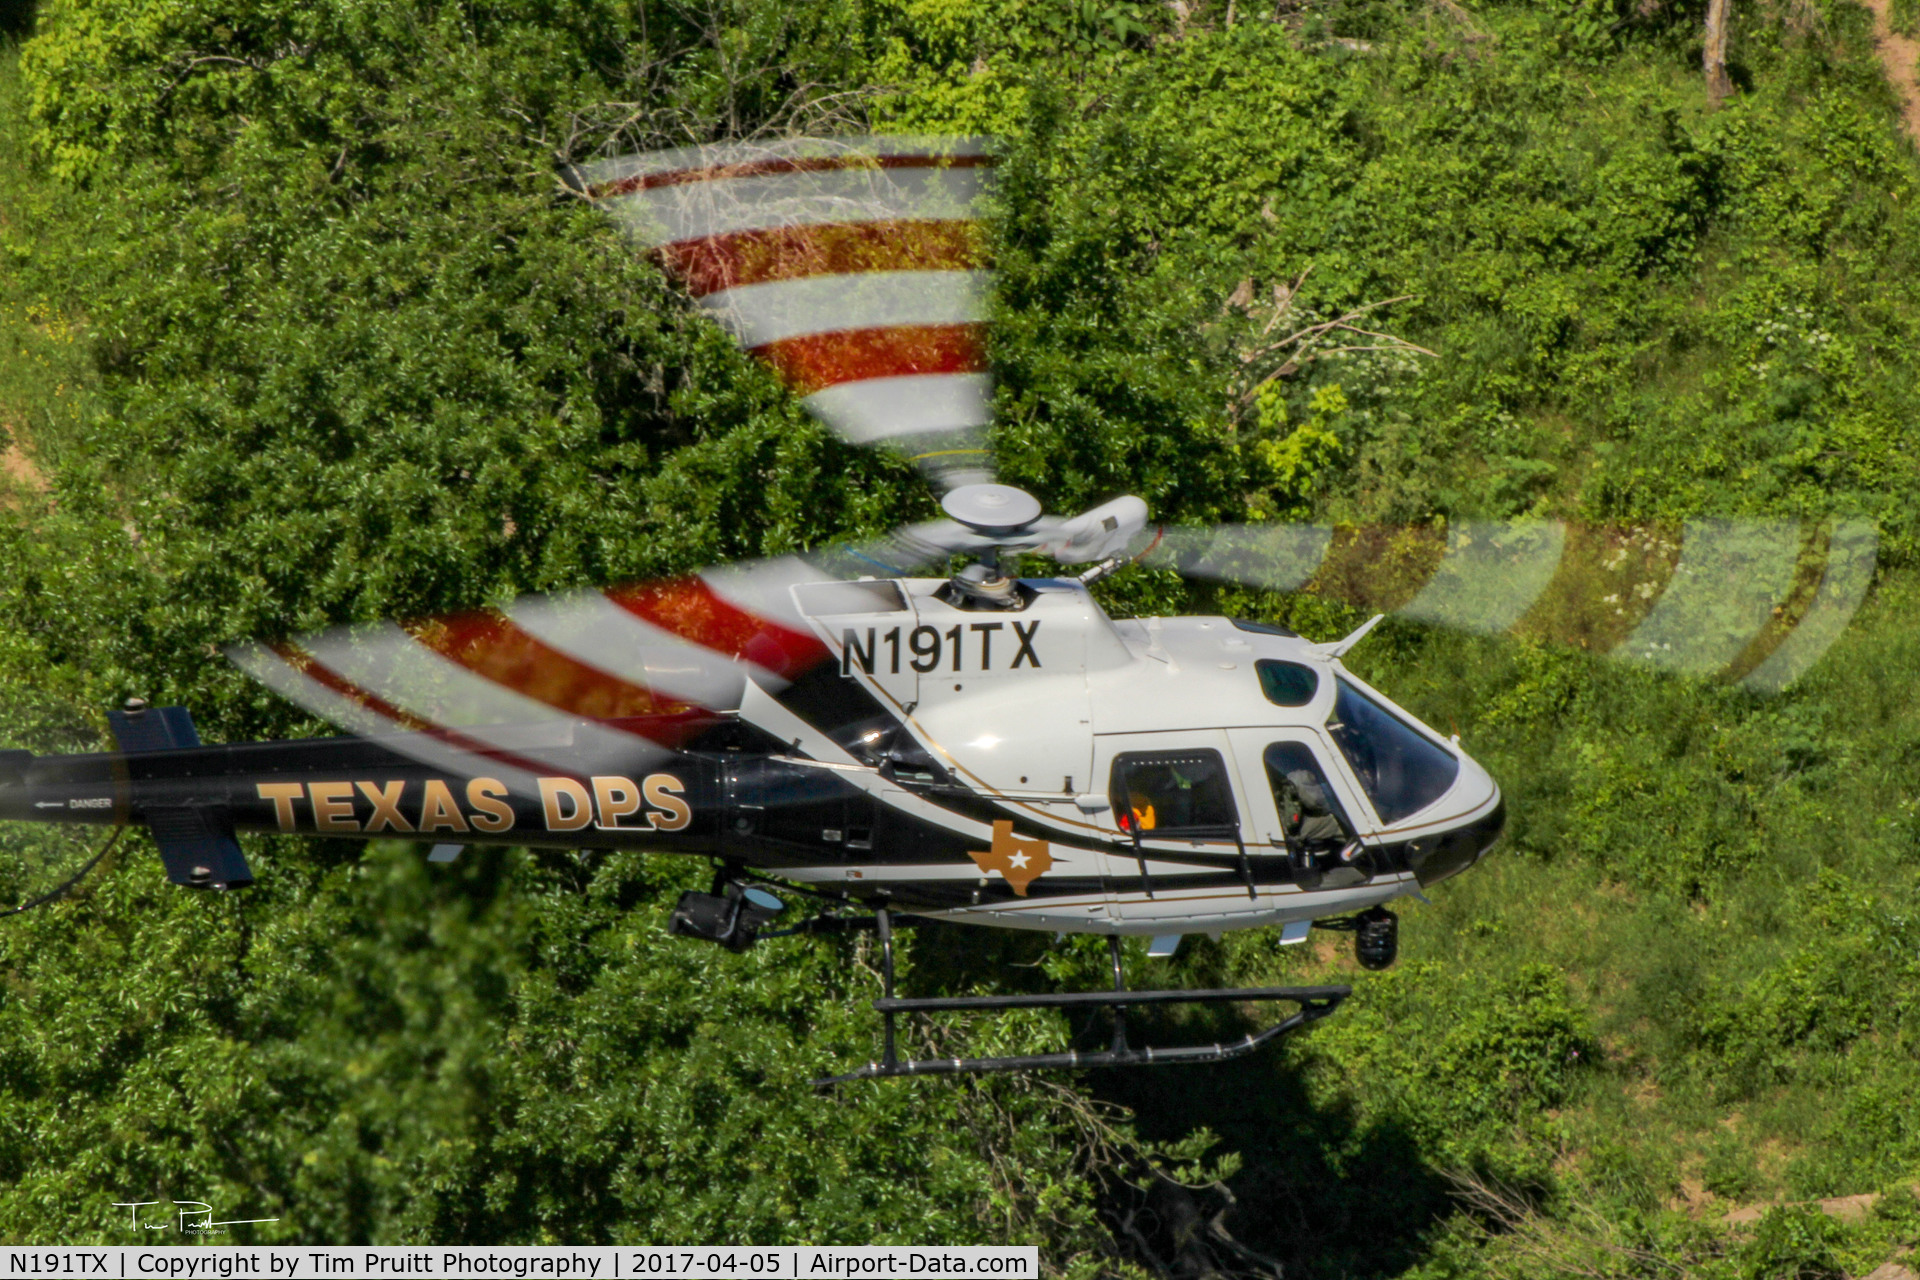 N191TX, Eurocopter AS-350B-3 Ecureuil Ecureuil C/N 4841, Texas Department of Public Safety Astar on patrol over Texas countryside